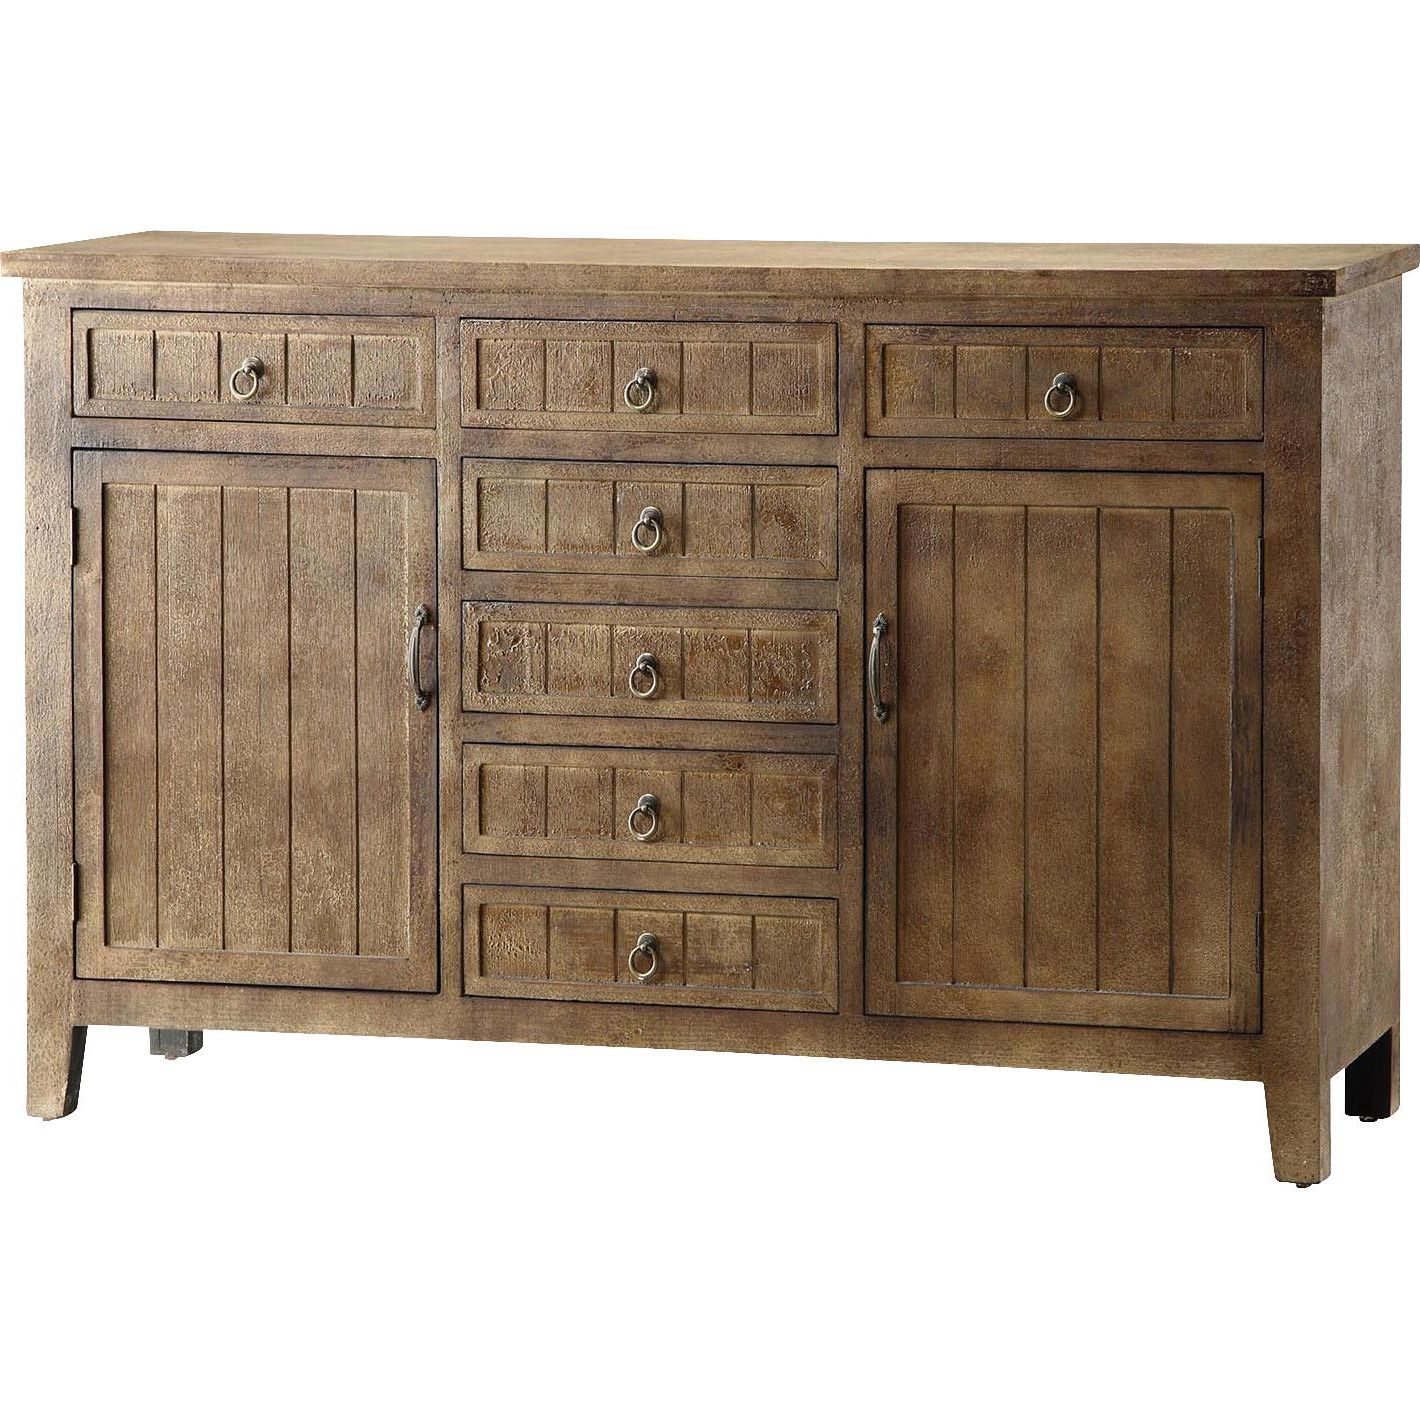 Crestview Collection Cheyenne Sideboard | Pollard Pertaining To Drummond 4 Drawer Sideboards (Gallery 9 of 20)